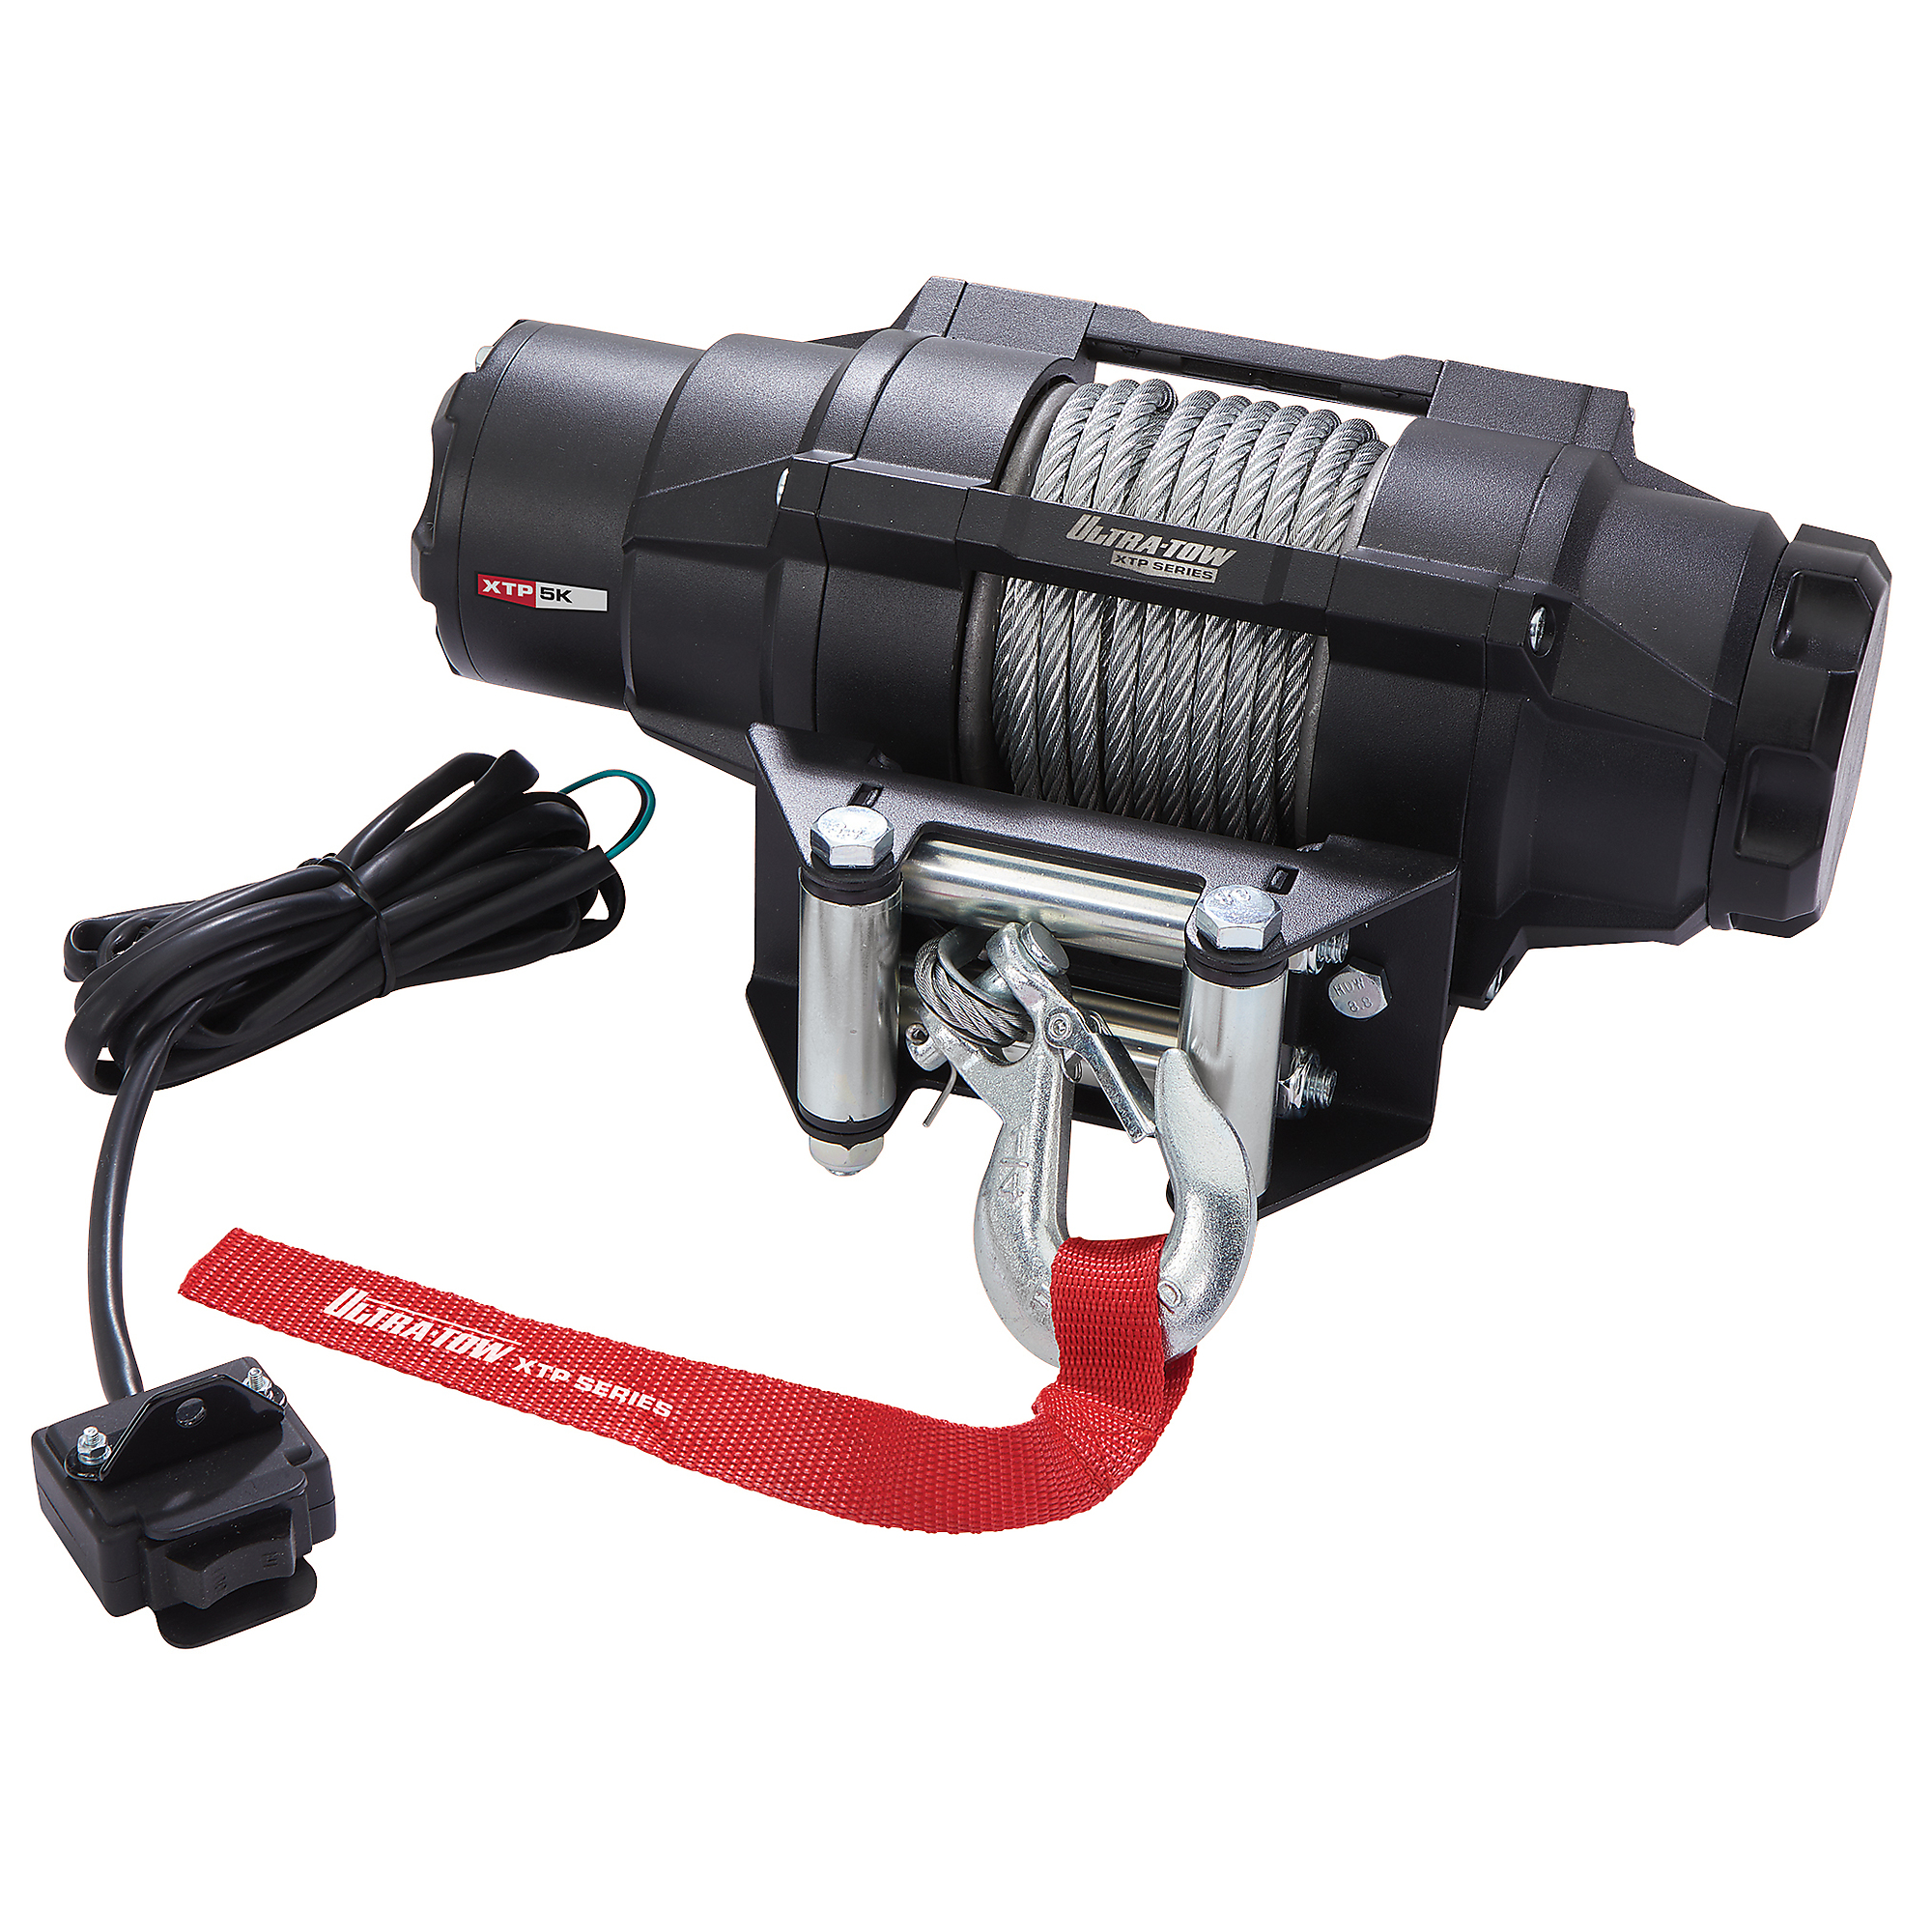 Ultra-Tow XTP 12 Volt DC Powered Electric ATV/UTV Winch, 5000-Lb. Capacity, Steel Wire Rope, Model LD2S-5000